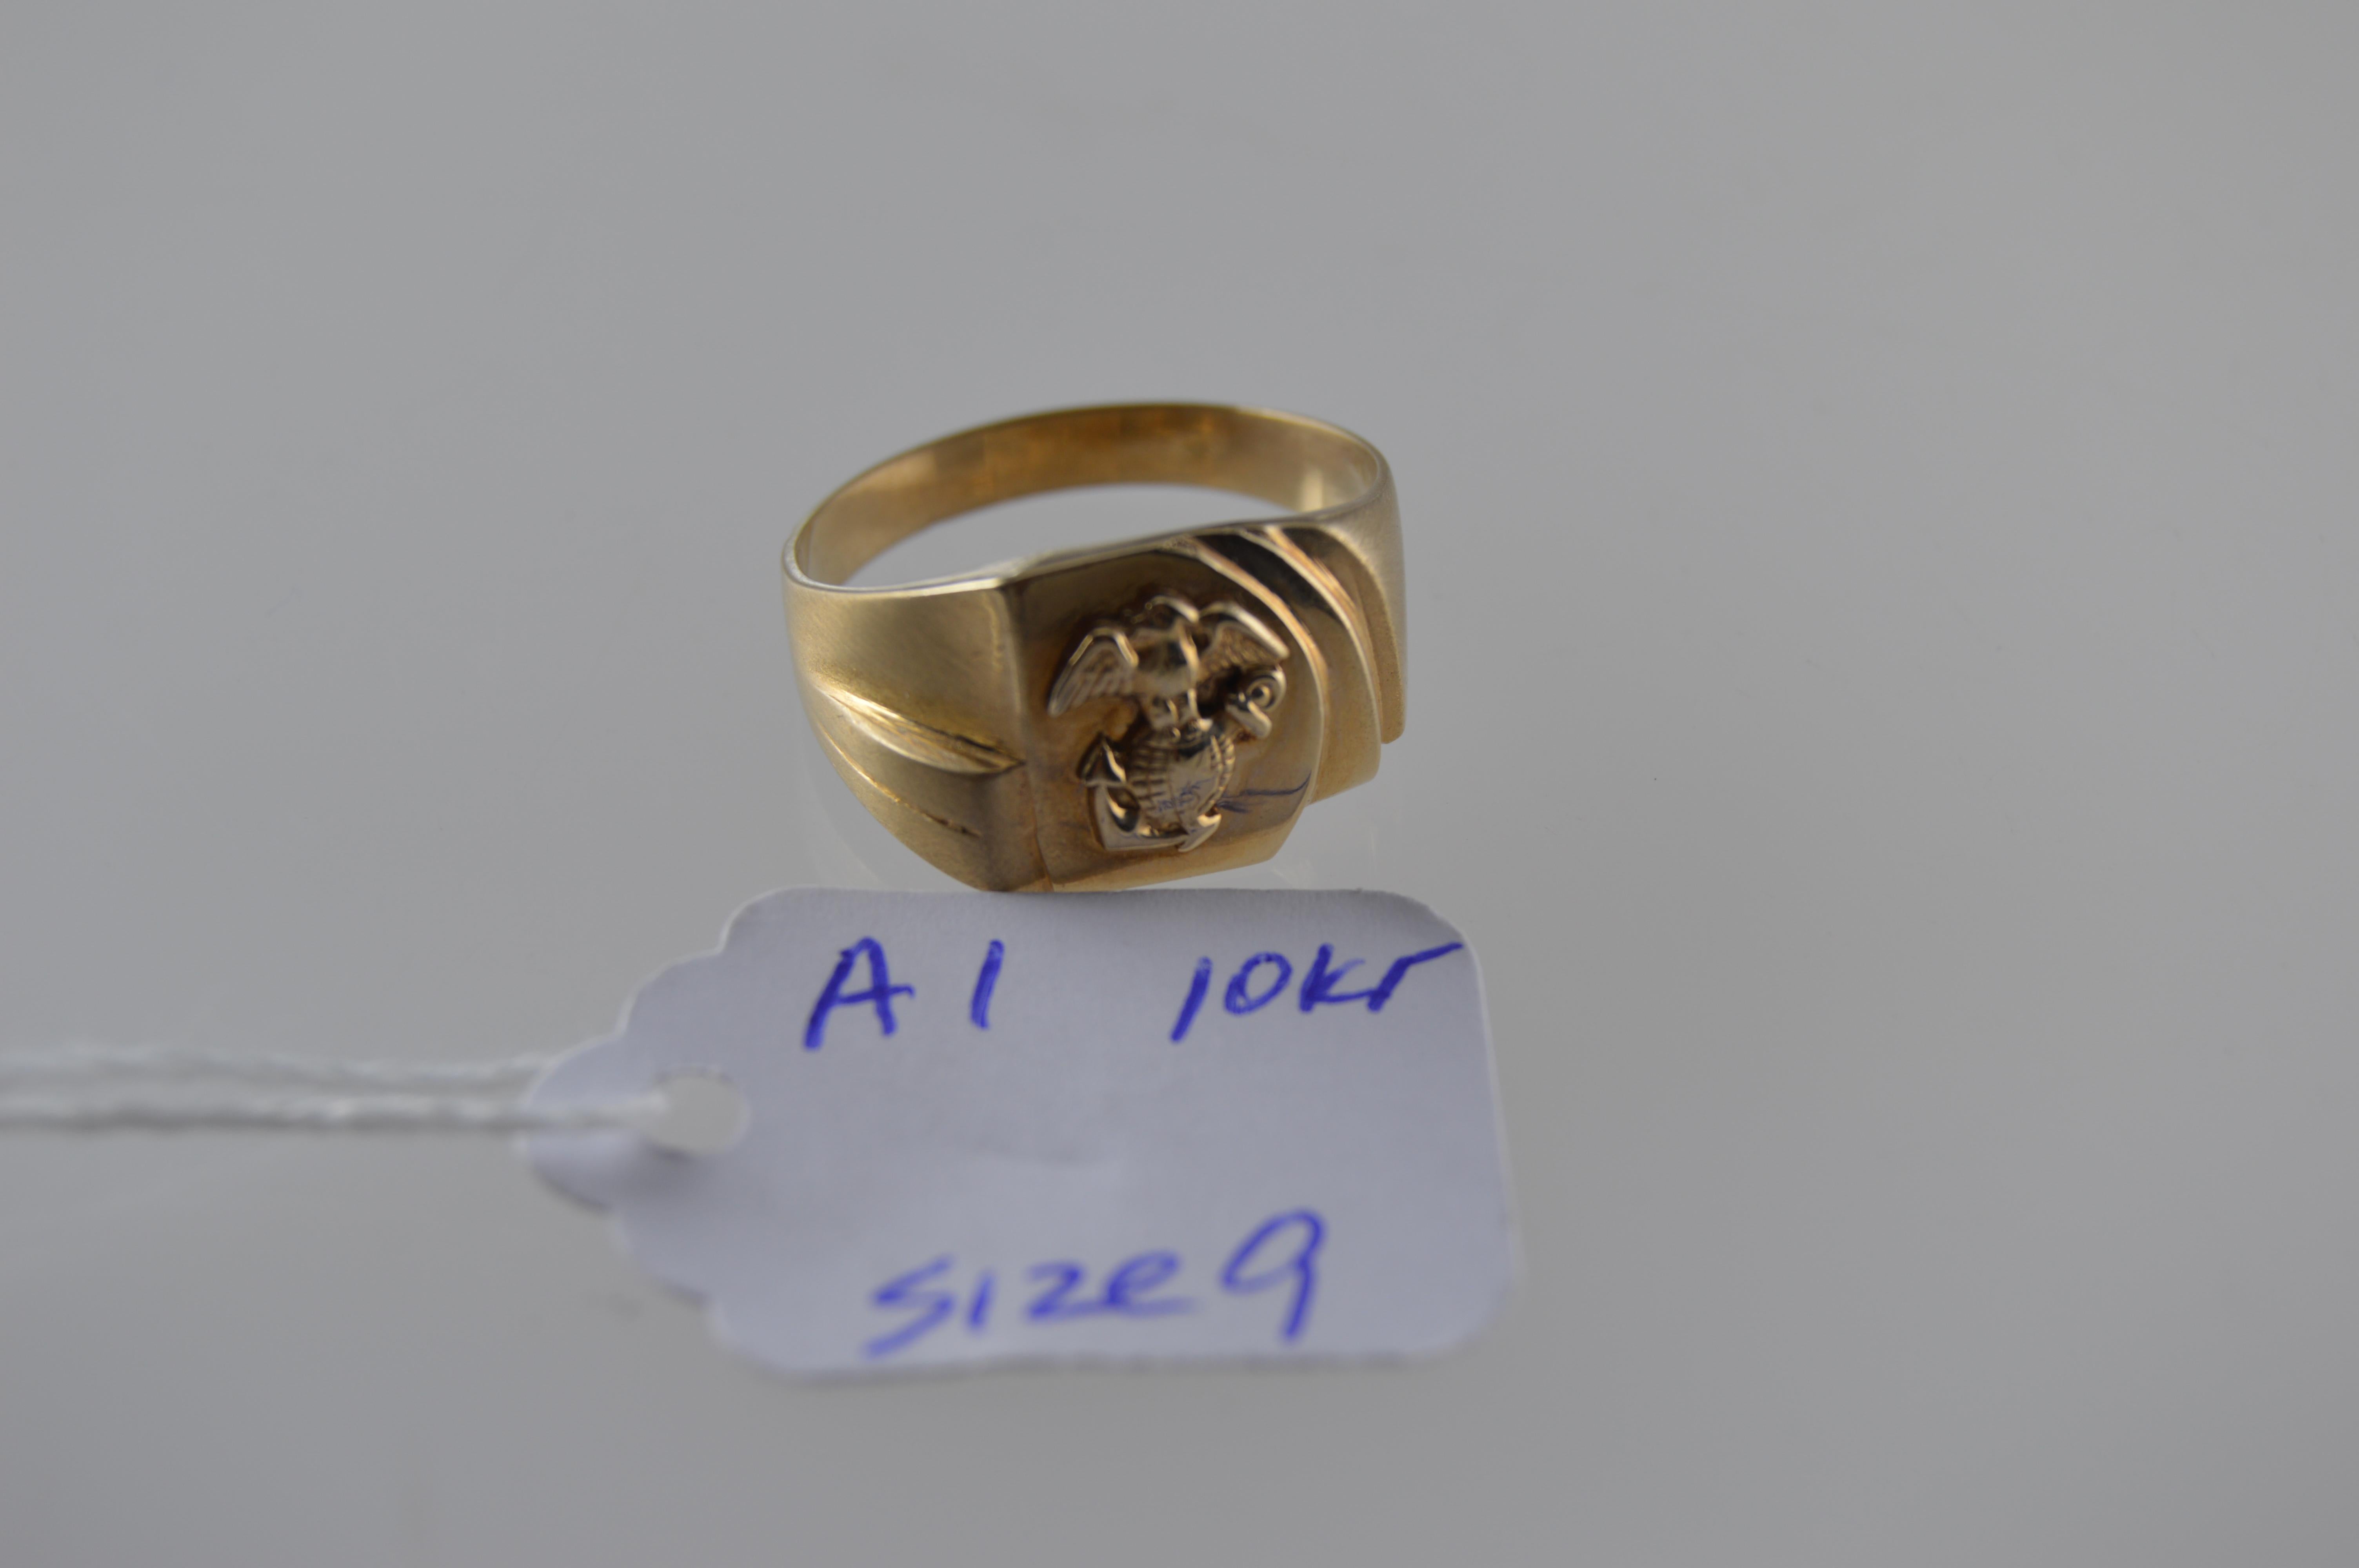 STYLE / REFERENCE: Art Deco 
METAL / MATERIAL: 10Kt. Solid Gold Die Struck 
CIRCA / YEAR: 1953
SIZE: 9

This wonderful hand made signet ring is done in a classic Art Deco Style. The insignia looks to be from the Unites States Naval Academy. It is